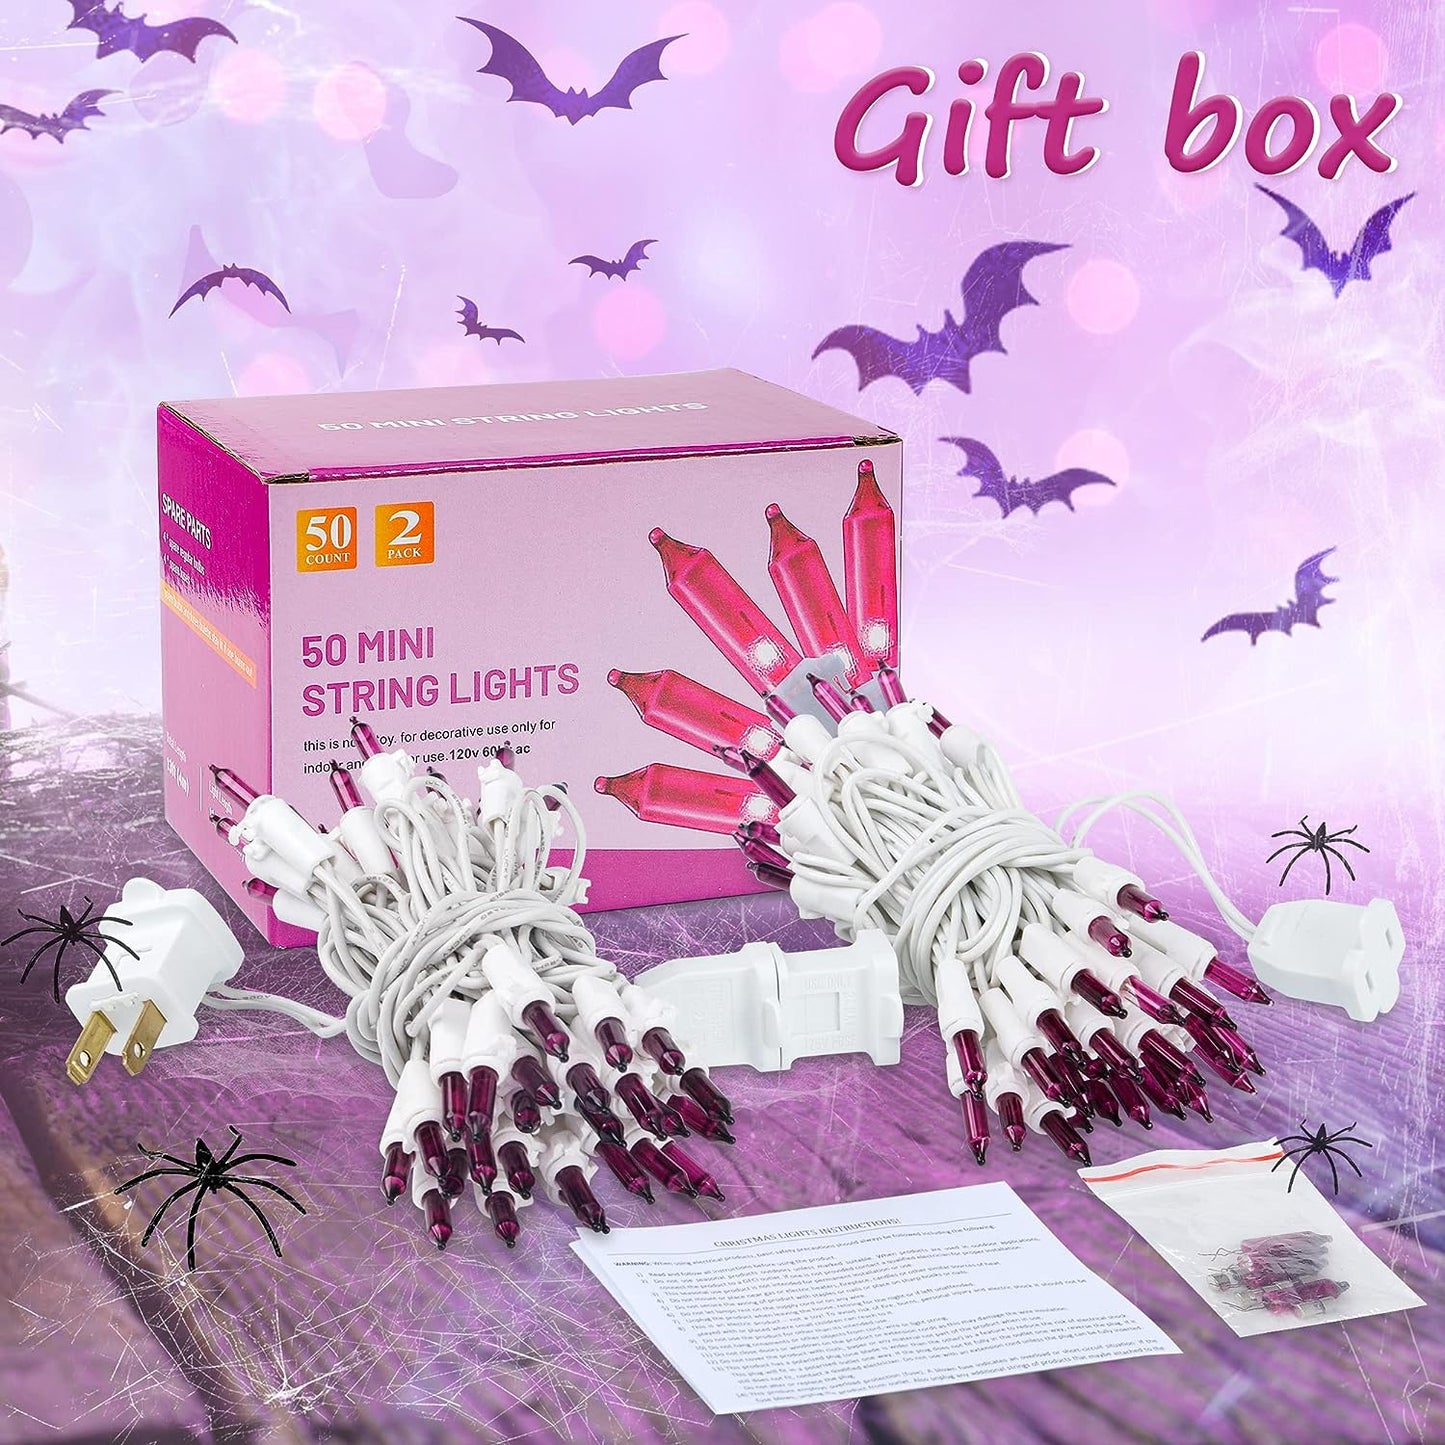 Christmas String Lights,2Pack 50Count 13Feet Incandescent Bulb Mini Lights Set with White Wire for Indoor Outdoor Halloween Valentine's Day Garden Party Xmas Tree Lights Decor,Pink Purple